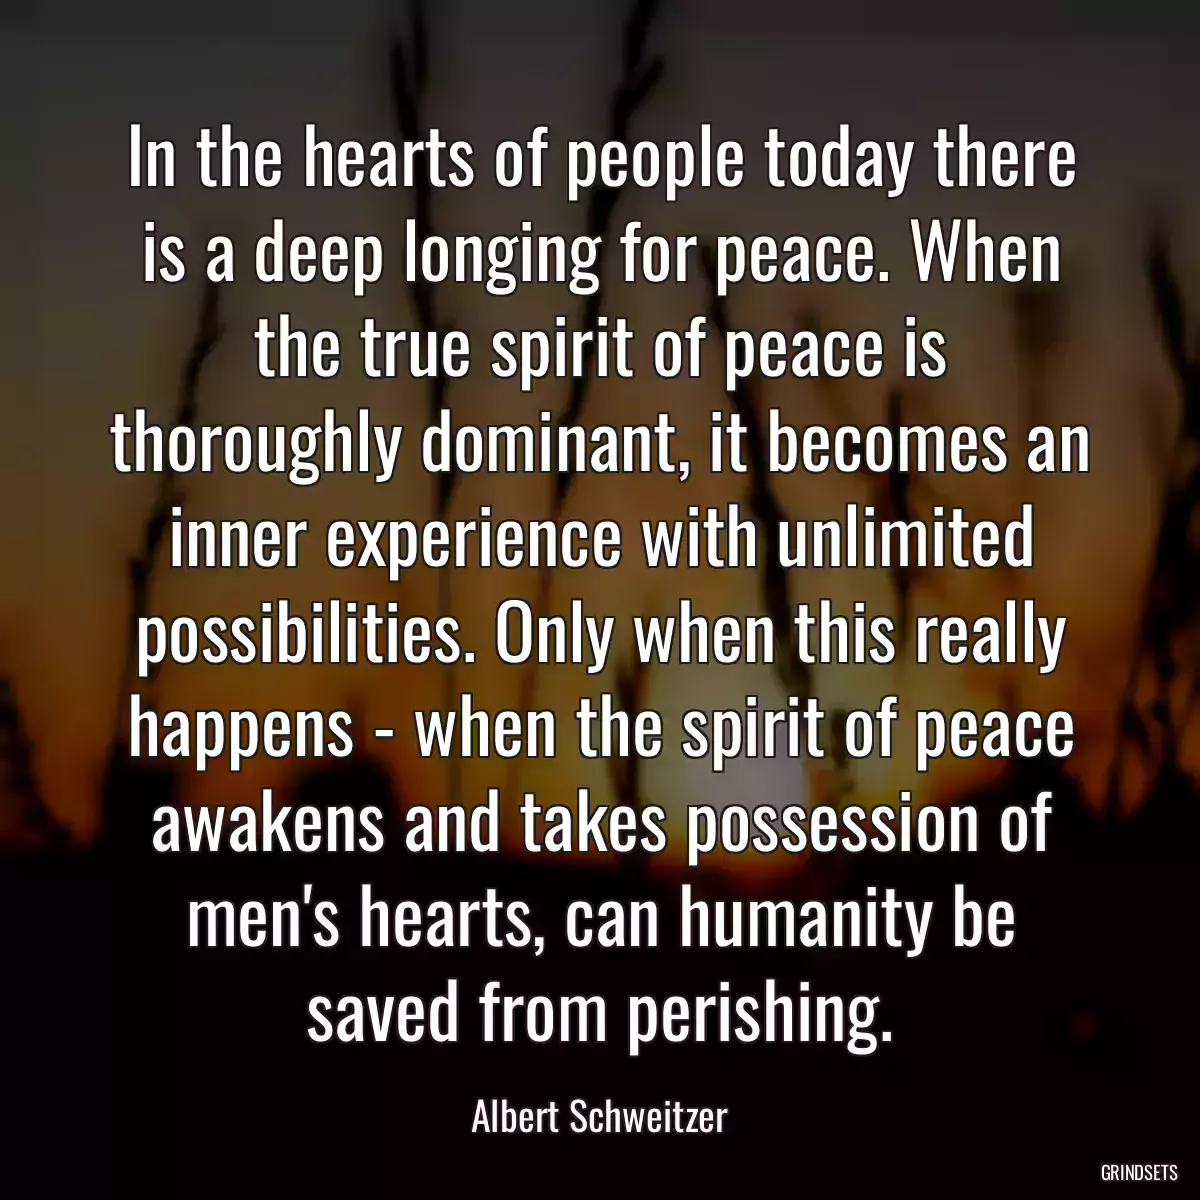 In the hearts of people today there is a deep longing for peace. When the true spirit of peace is thoroughly dominant, it becomes an inner experience with unlimited possibilities. Only when this really happens - when the spirit of peace awakens and takes possession of men\'s hearts, can humanity be saved from perishing.